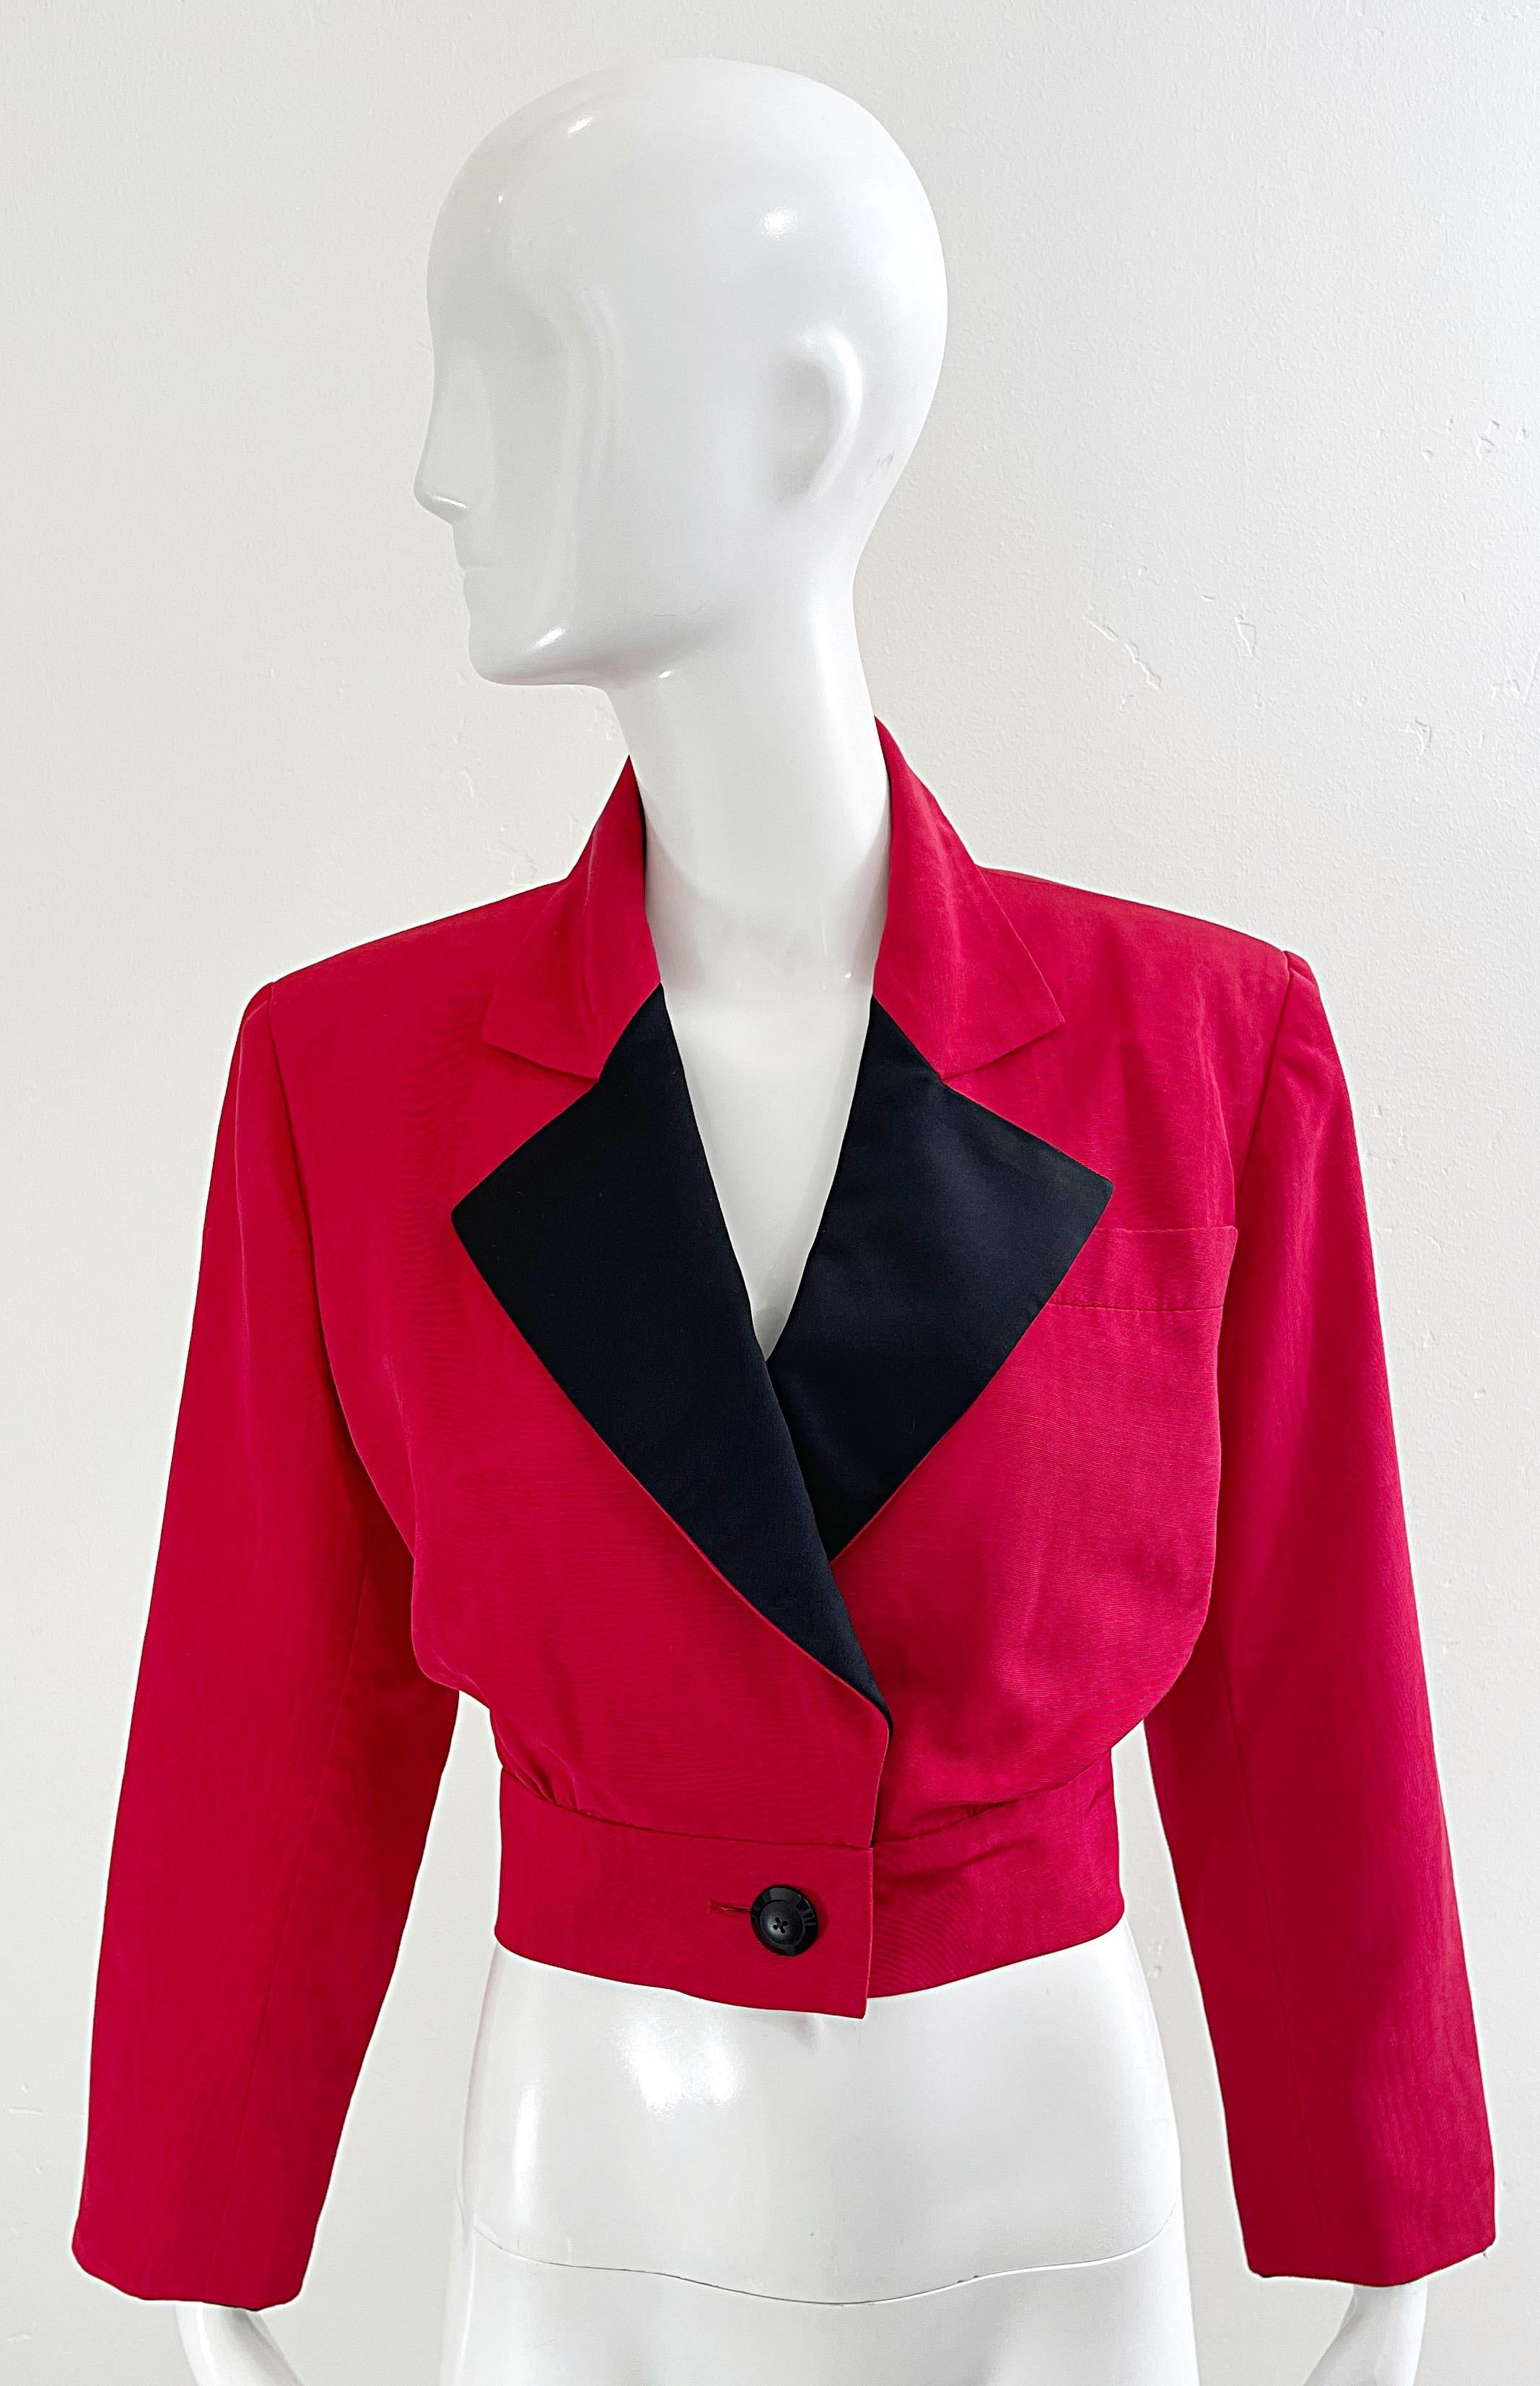 Chic early 80s YVES SAINT LAURENT Rive Gauche red and black silk cropped blazer jacket ! Features a lipstick red body with exaggerated signature black lapels. Single button closure. Fully lined. Can easily be dressed up or down. Pair with jeans, a